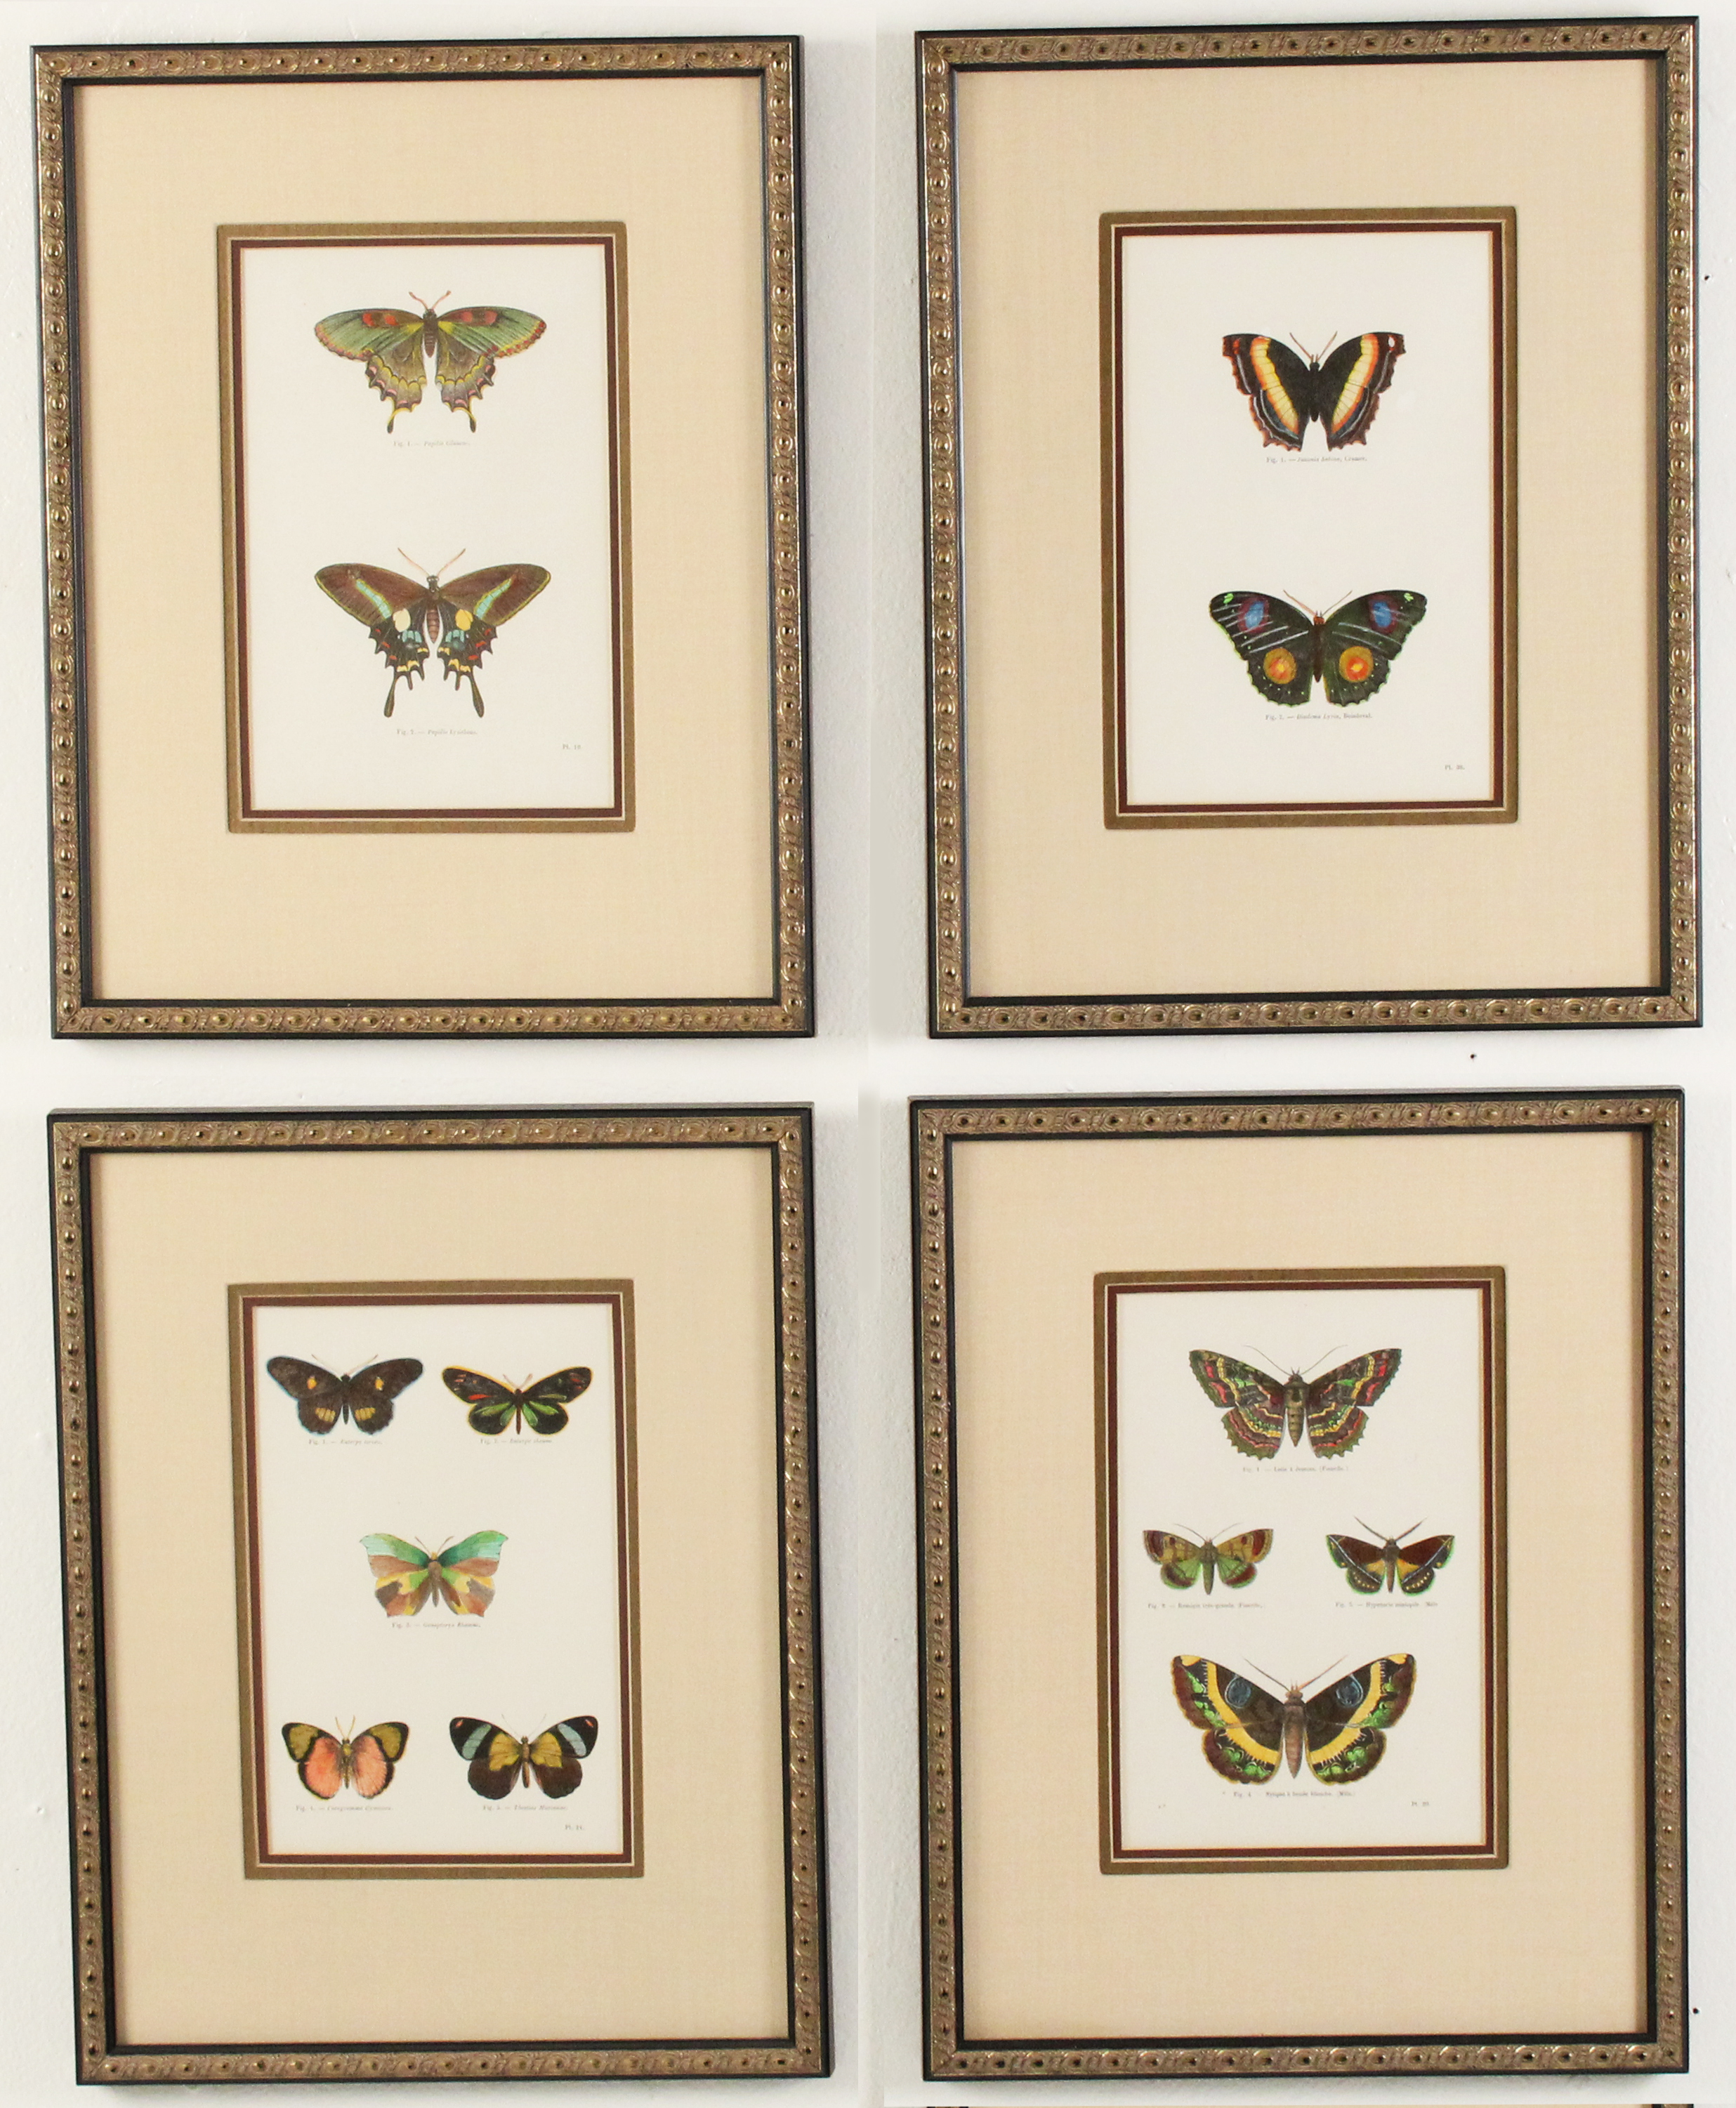 GROUP OF 4 HAND COLORED BUTTERFLY STUDIES